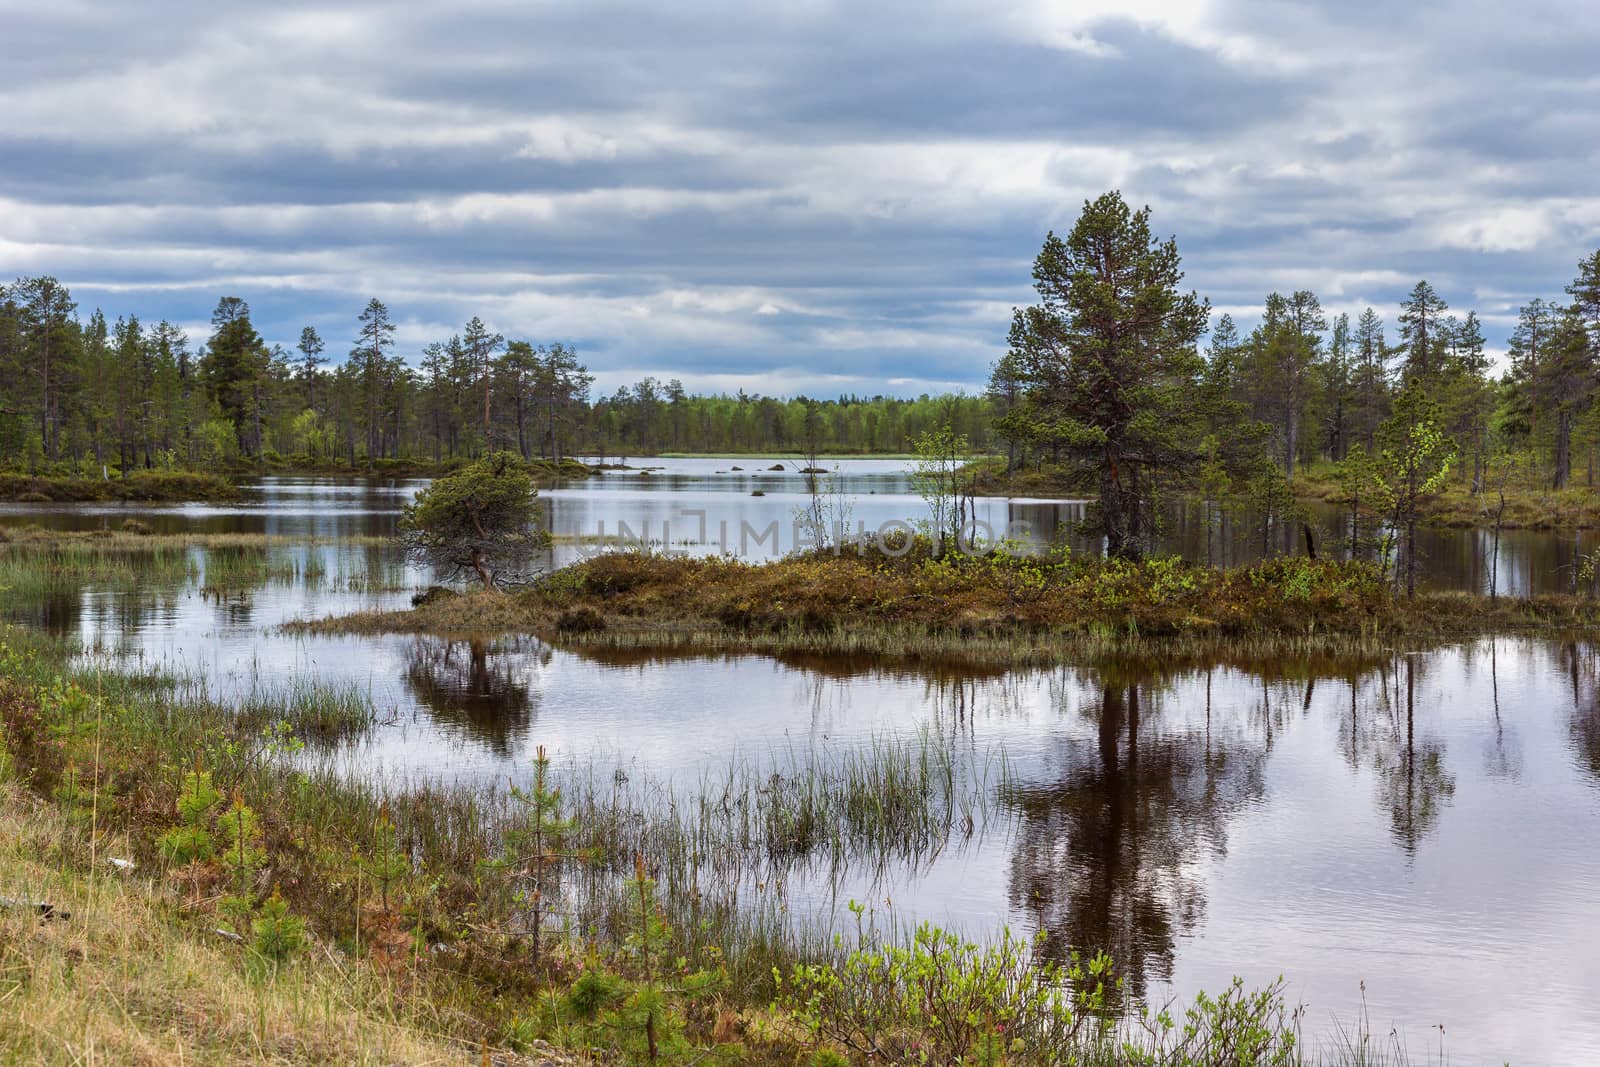 Plenty of water creates islets in marshlands in between higher lying patches filled with trees and other vegetation.